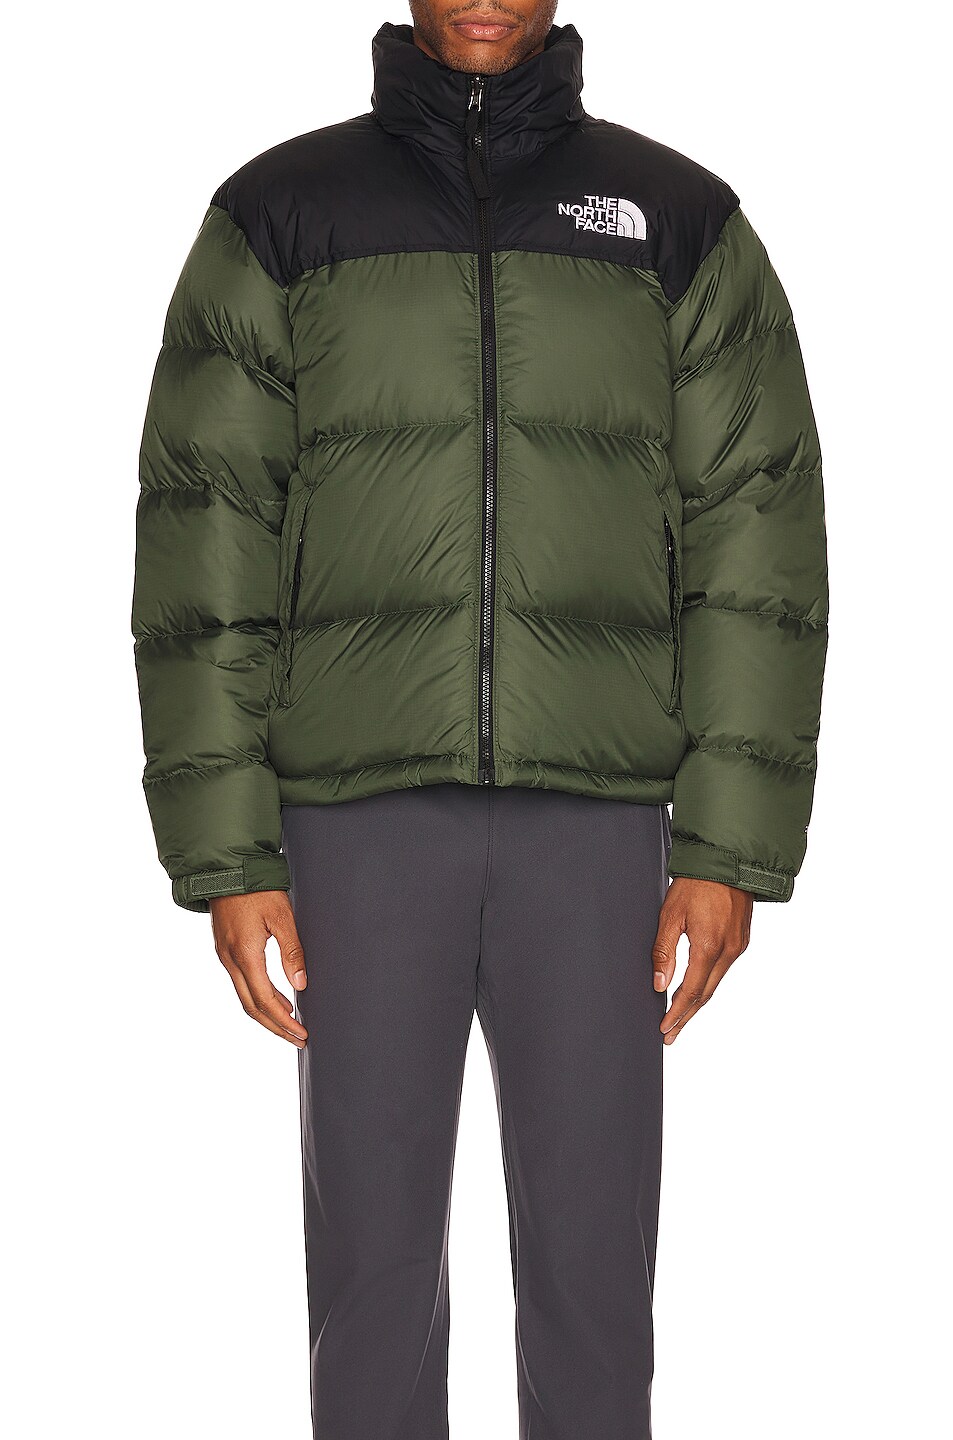 The North Face 1996 Retro Nuptse Jacket in Thyme | FWRD